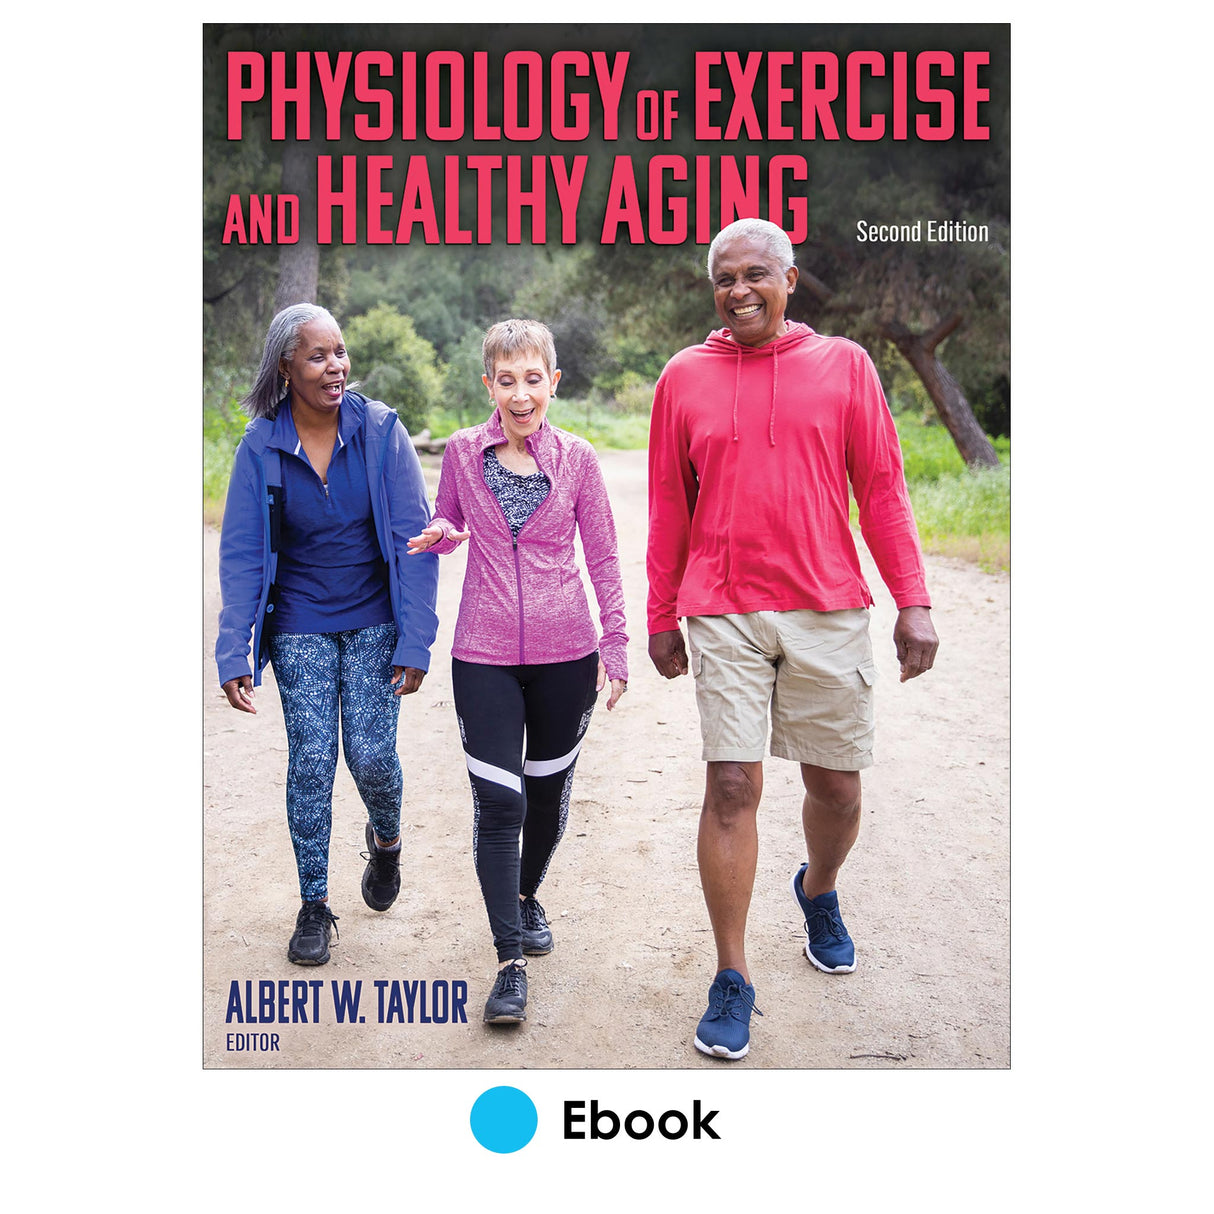 Physiology of Exercise and Healthy Aging 2nd Edition epub